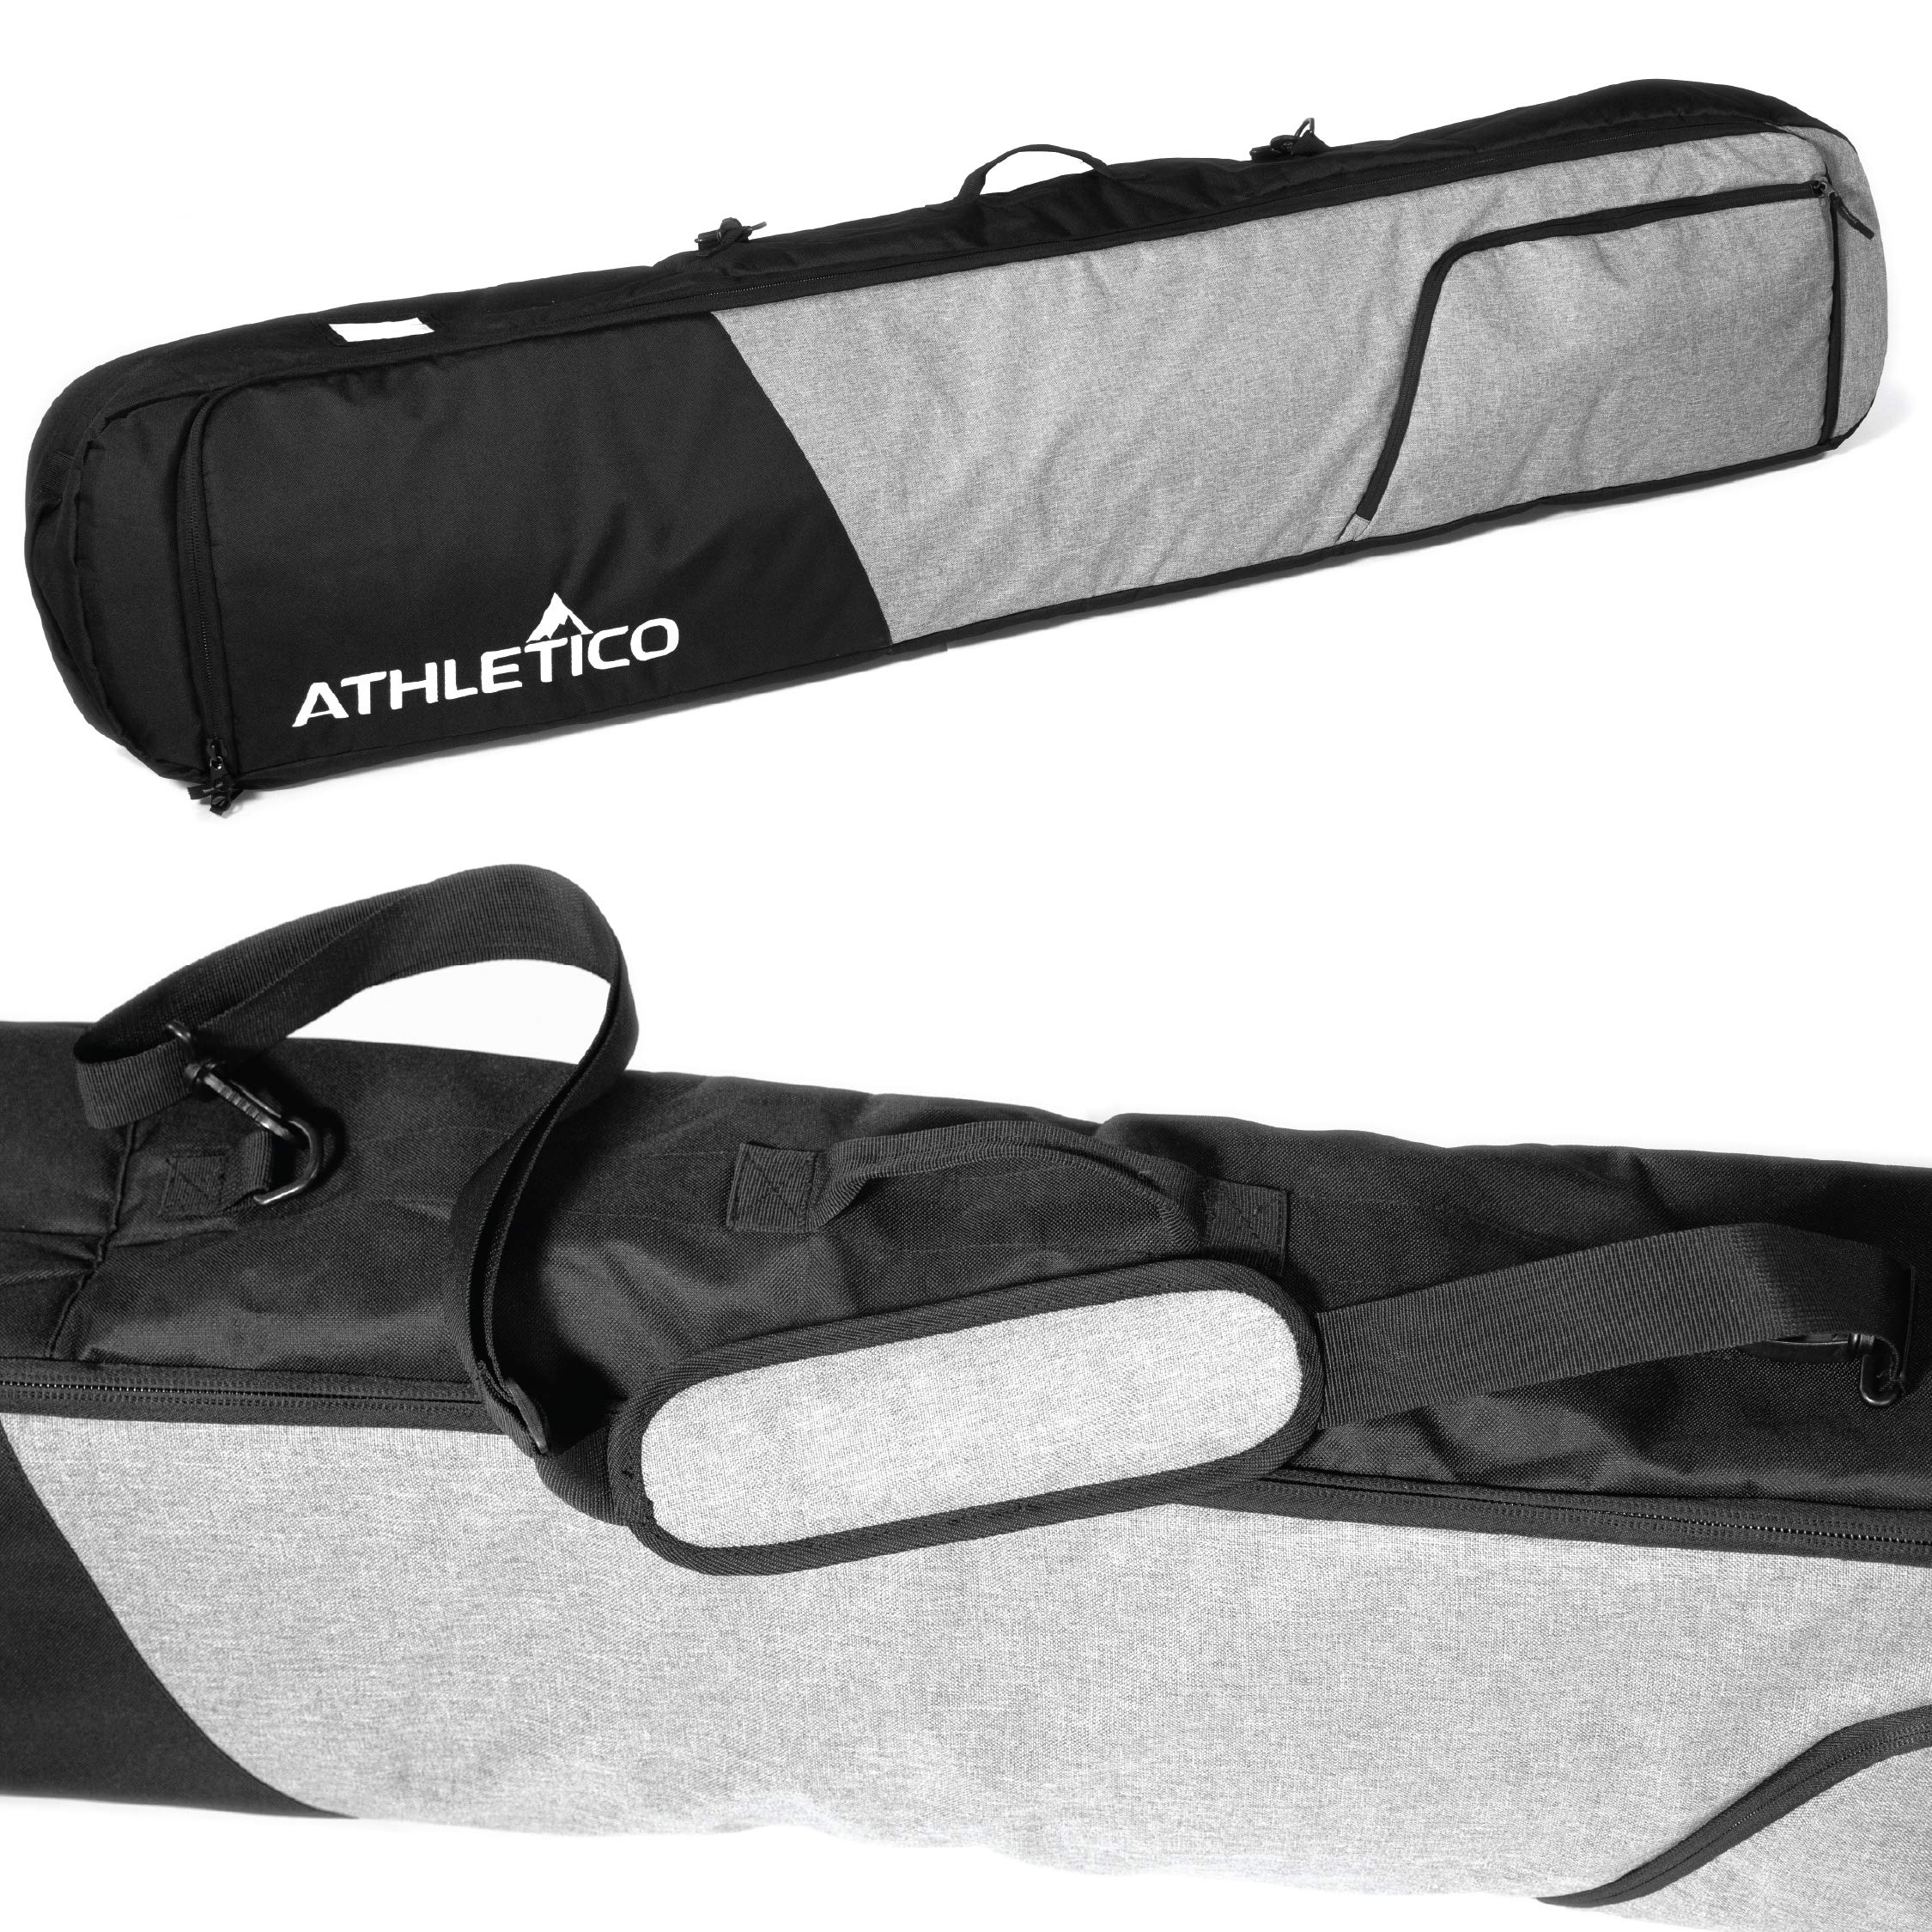 Athletico Peak Padded Snowboard Bag - Travel Bag for Single Snowboard and Snowboard Boots  - Good